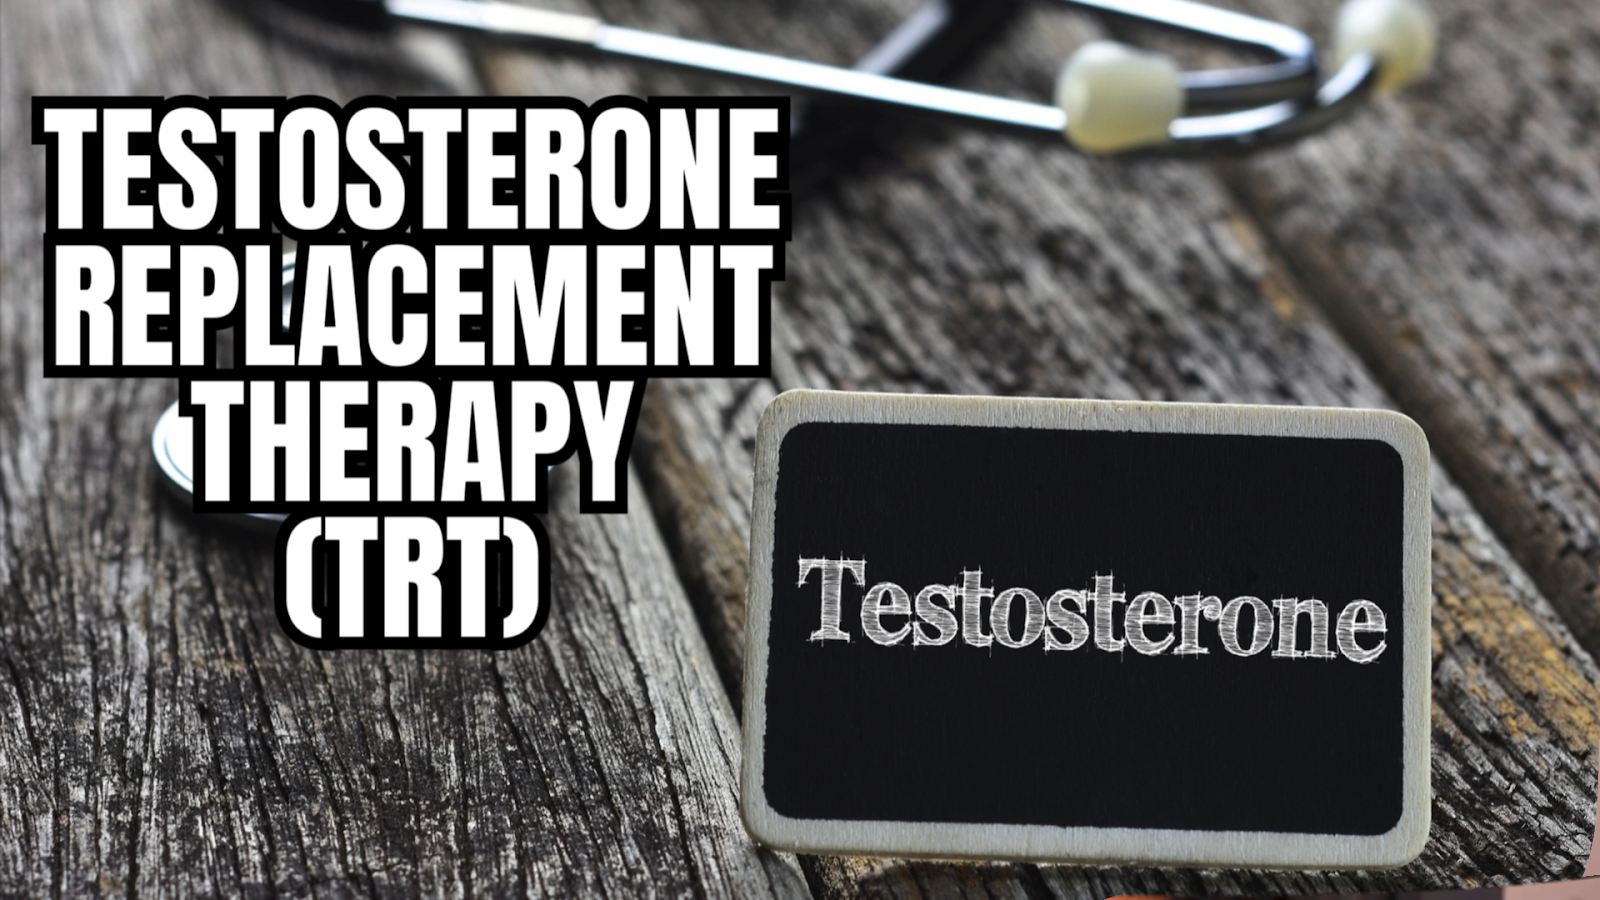 Testosterone Replacement Therapy is becoming more common among adults